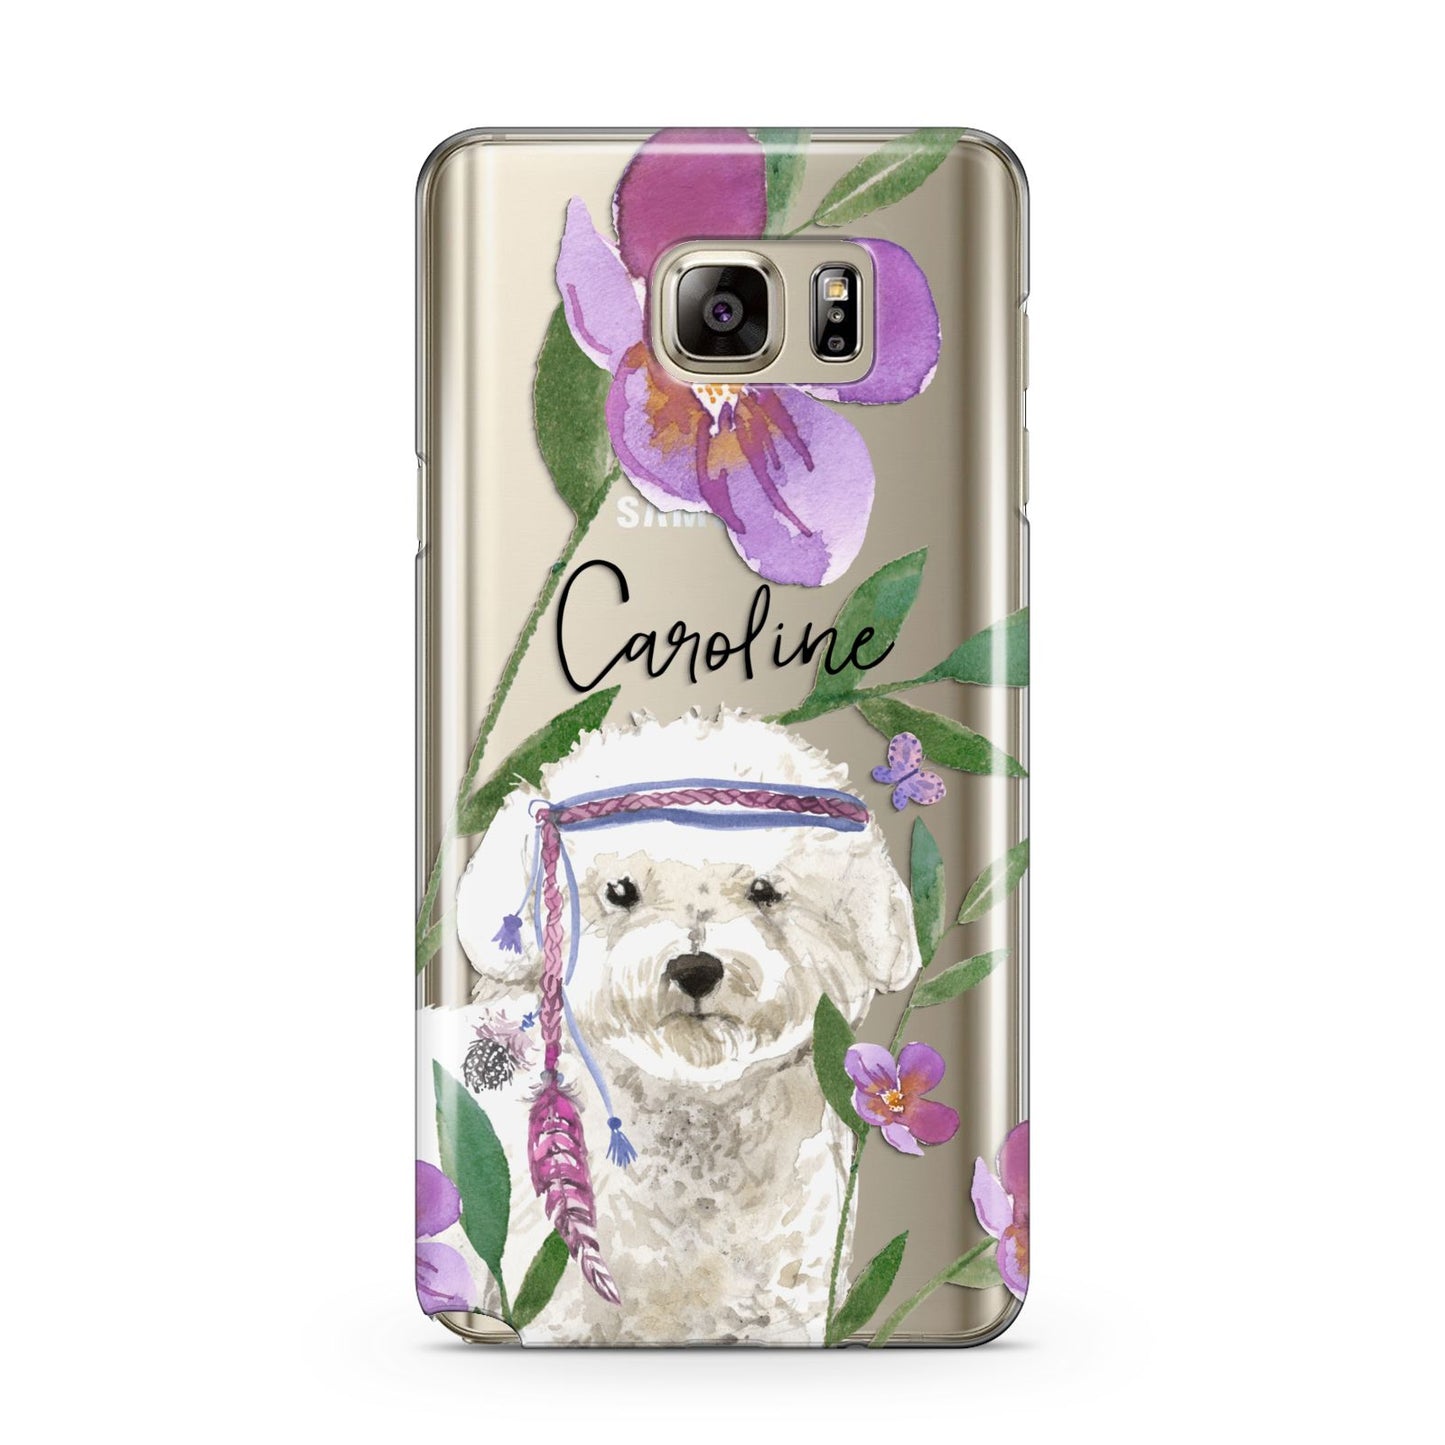 Personalised Bichon Frise Samsung Galaxy Note 5 Case